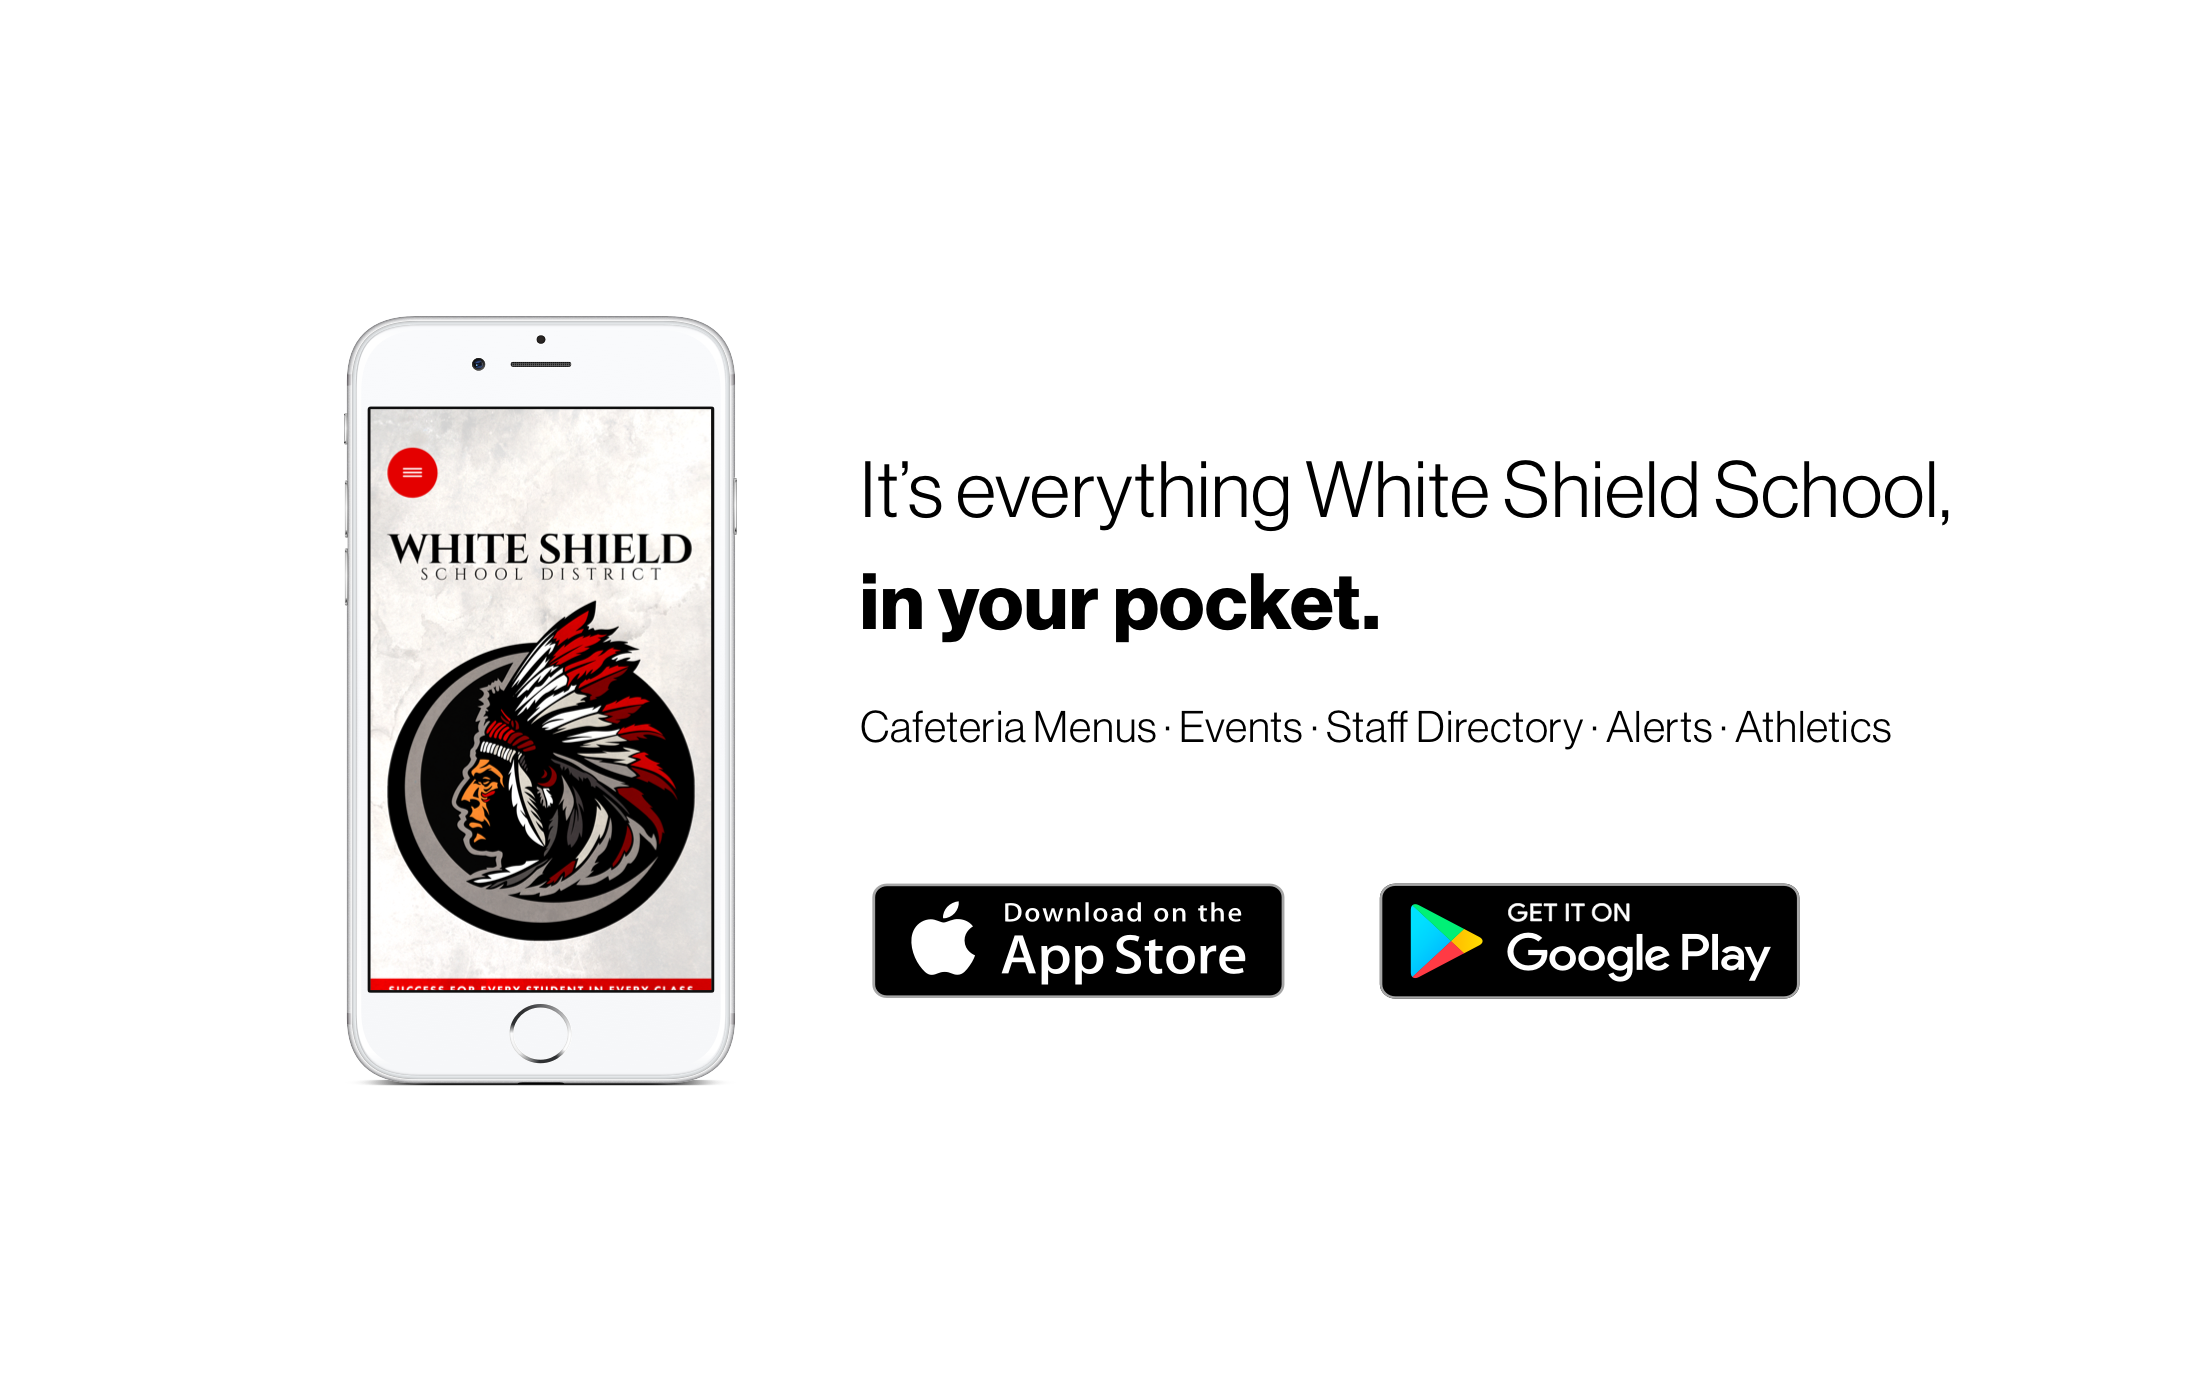 It's everything White Shield School in your pocket